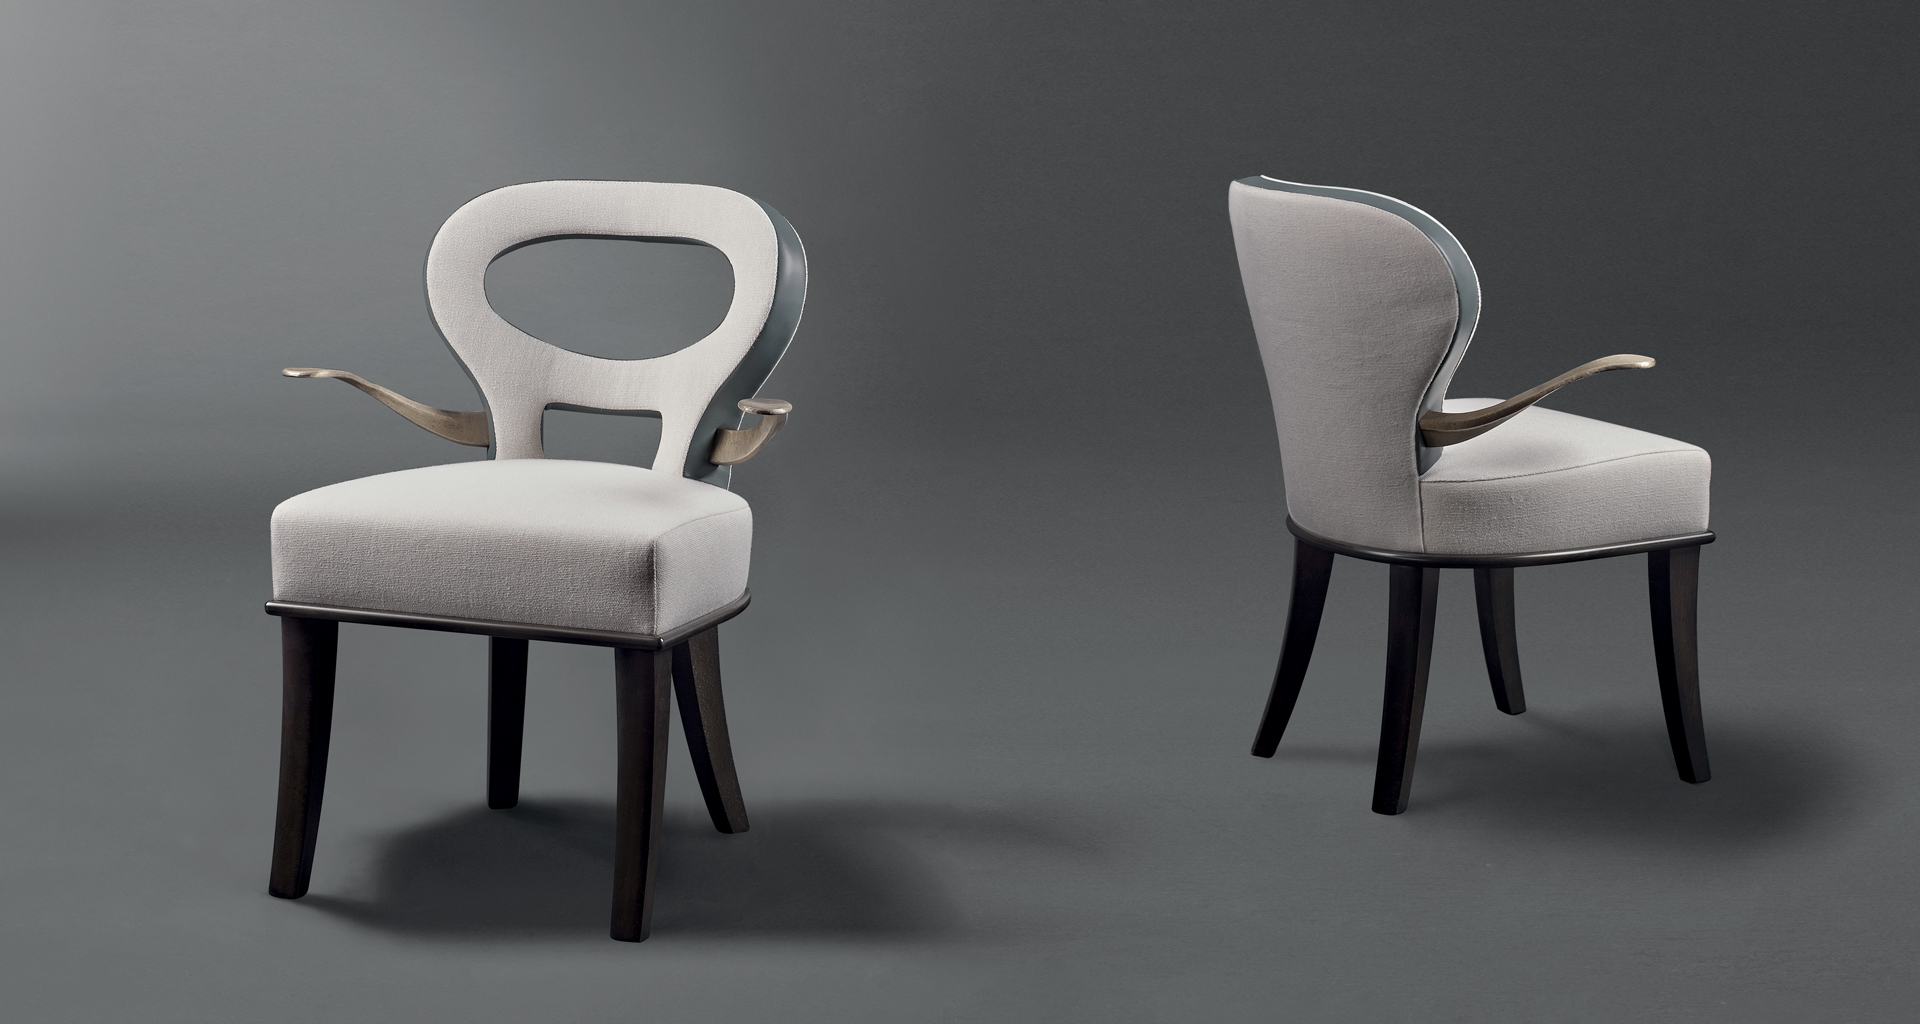 Moka e Roka are two wooden chairs covered in fabric and leather, with or without bronze armrests, from Promemoria's catalogue | Promemoria